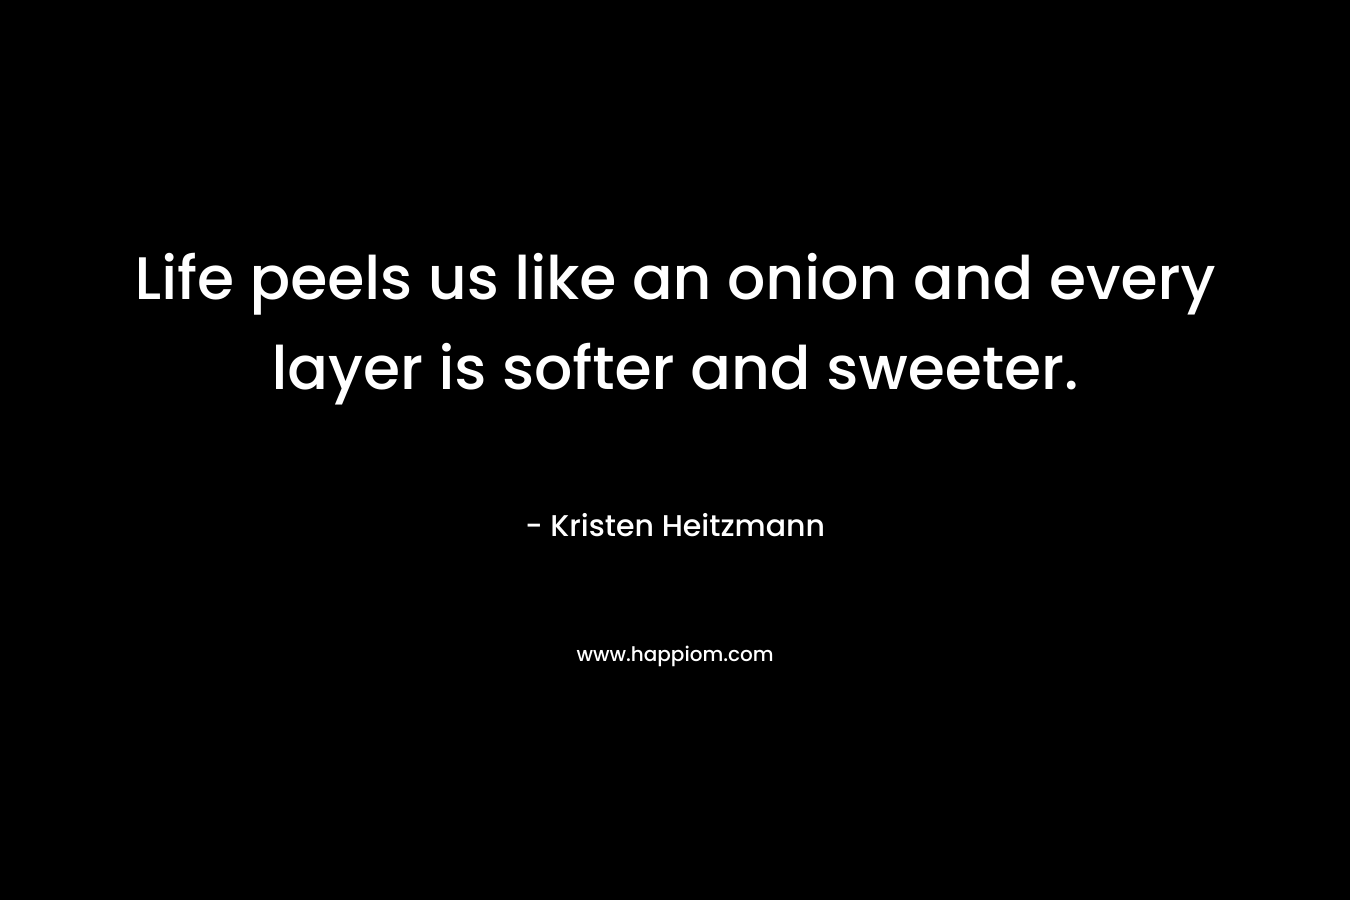 Life peels us like an onion and every layer is softer and sweeter.